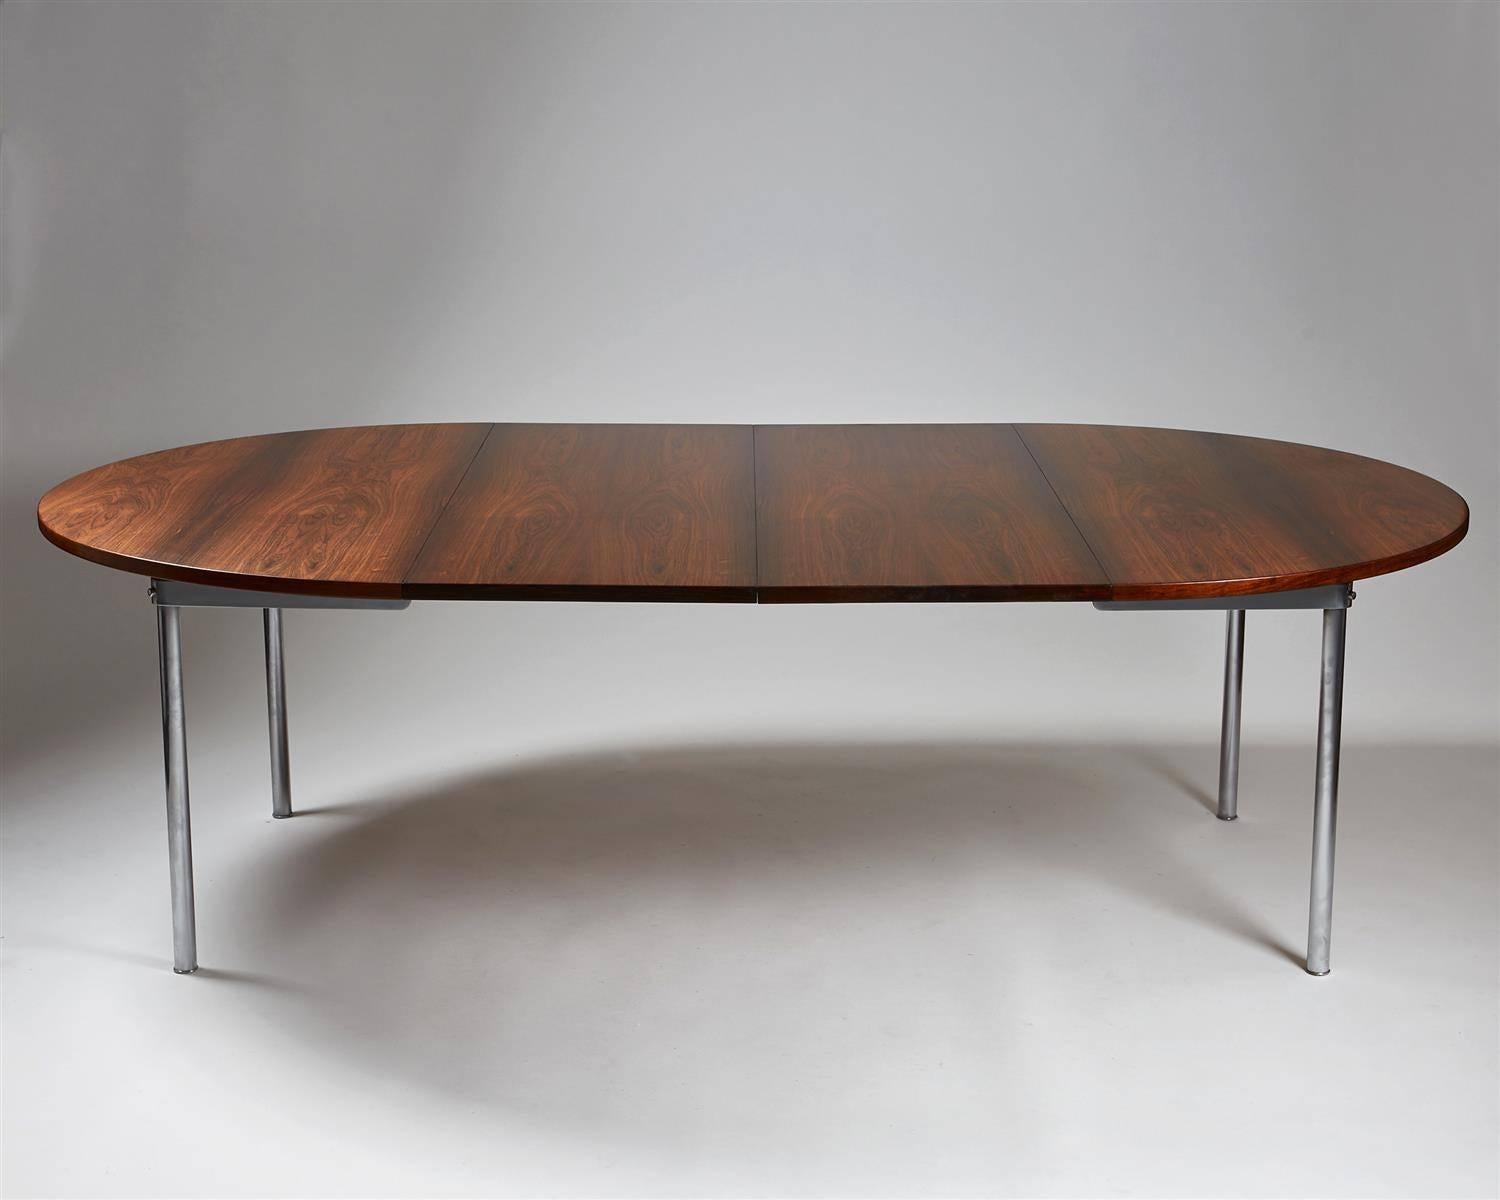 Dining table designed by Hans Wegner for Andreas Tuck, Denmark, 1961. Rosewood and brushed steel. 

Measures: H 70.5 cm / 27 3/4''
D 135 cm / 53 1/4''
Total length 235 cm / 7'9''
Two extension leaves at 50 cm / 19 3/4'' each.